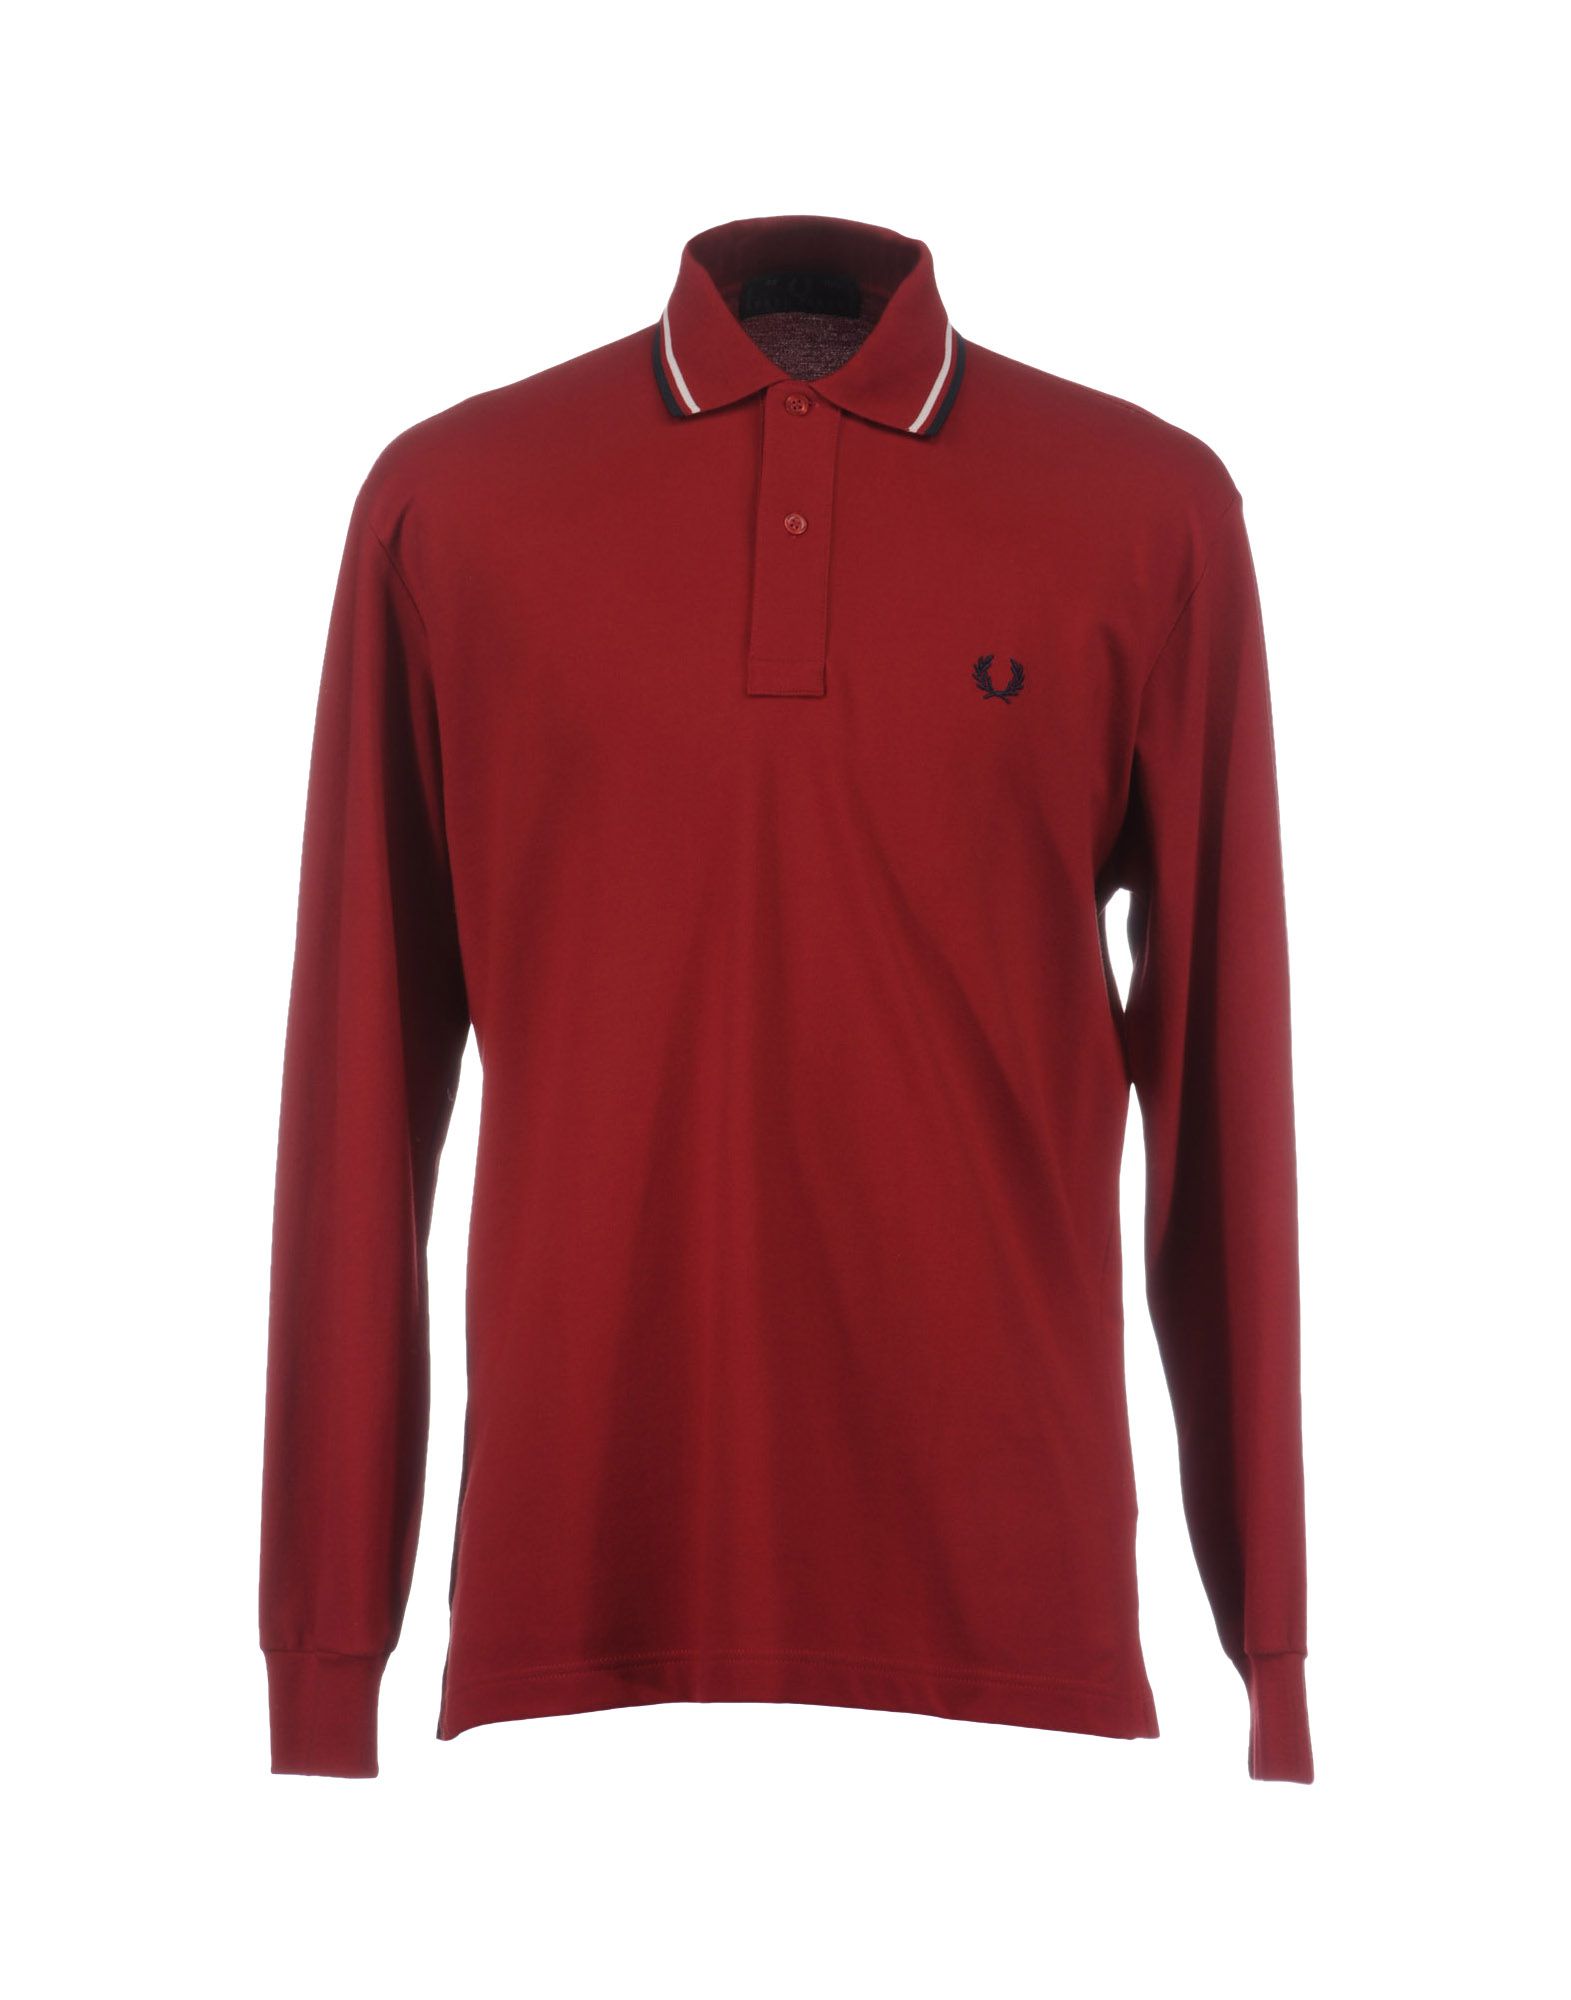 Foto fred perry polos
 foto 93568